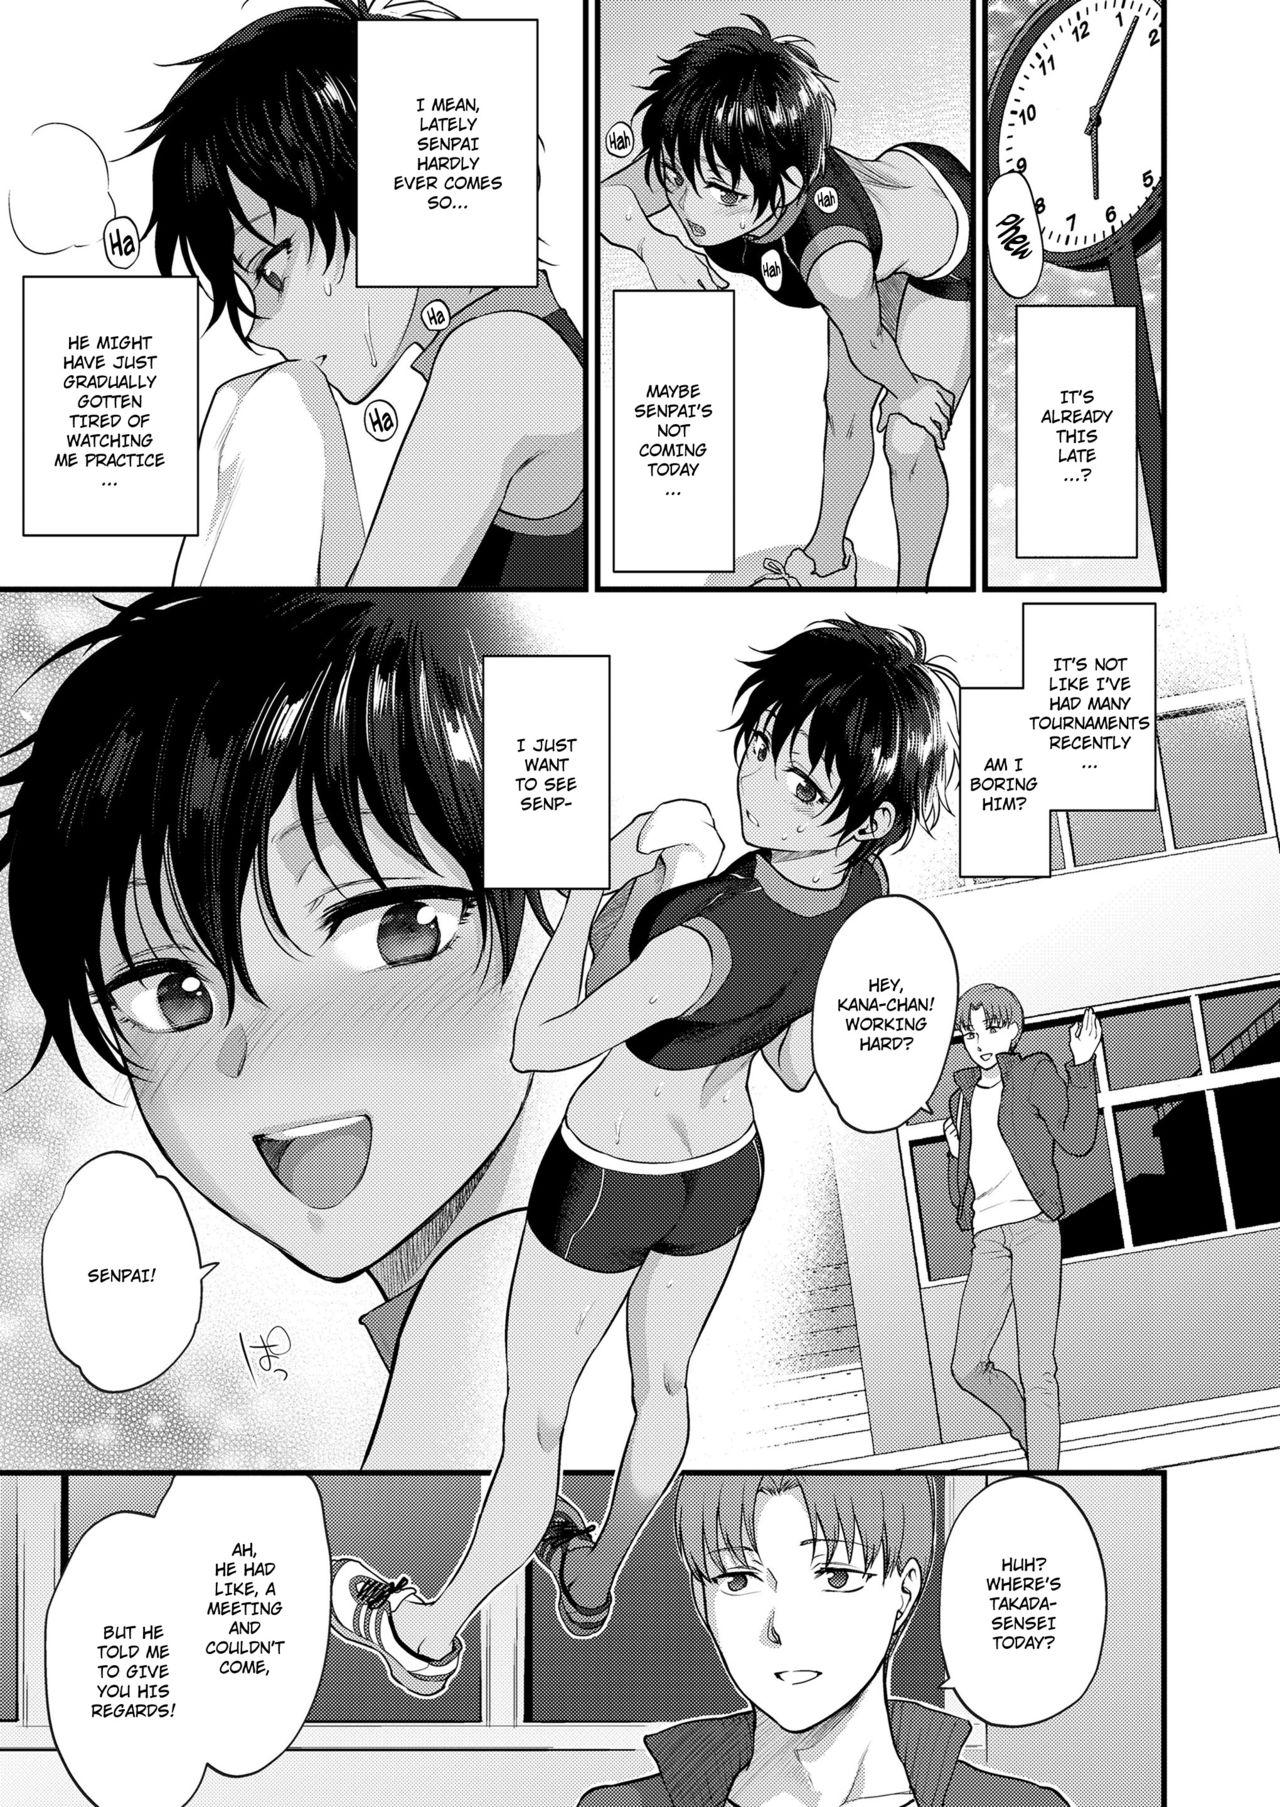 Bhabi Watashi no Koto dake Mite Hoshii | I Want You to Look at Me Only Transsexual - Page 5